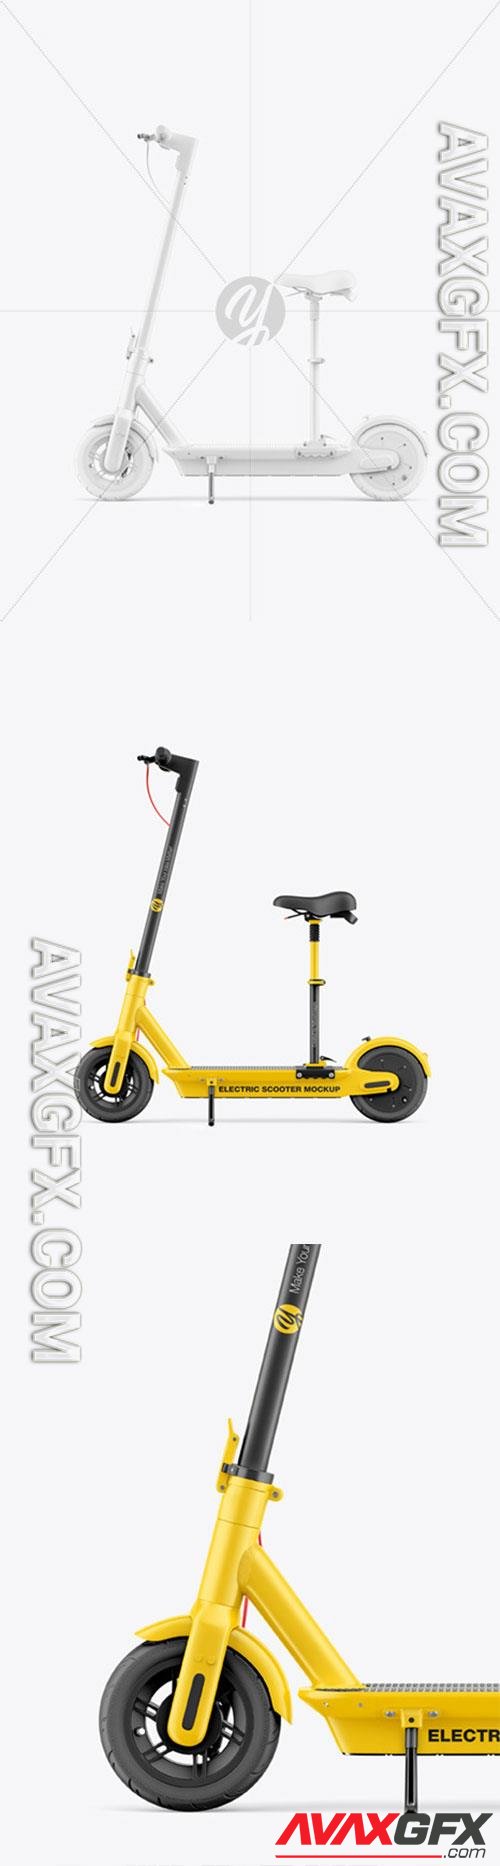 Electric Scooter Mockup with Seat - Side View 86461 TIF